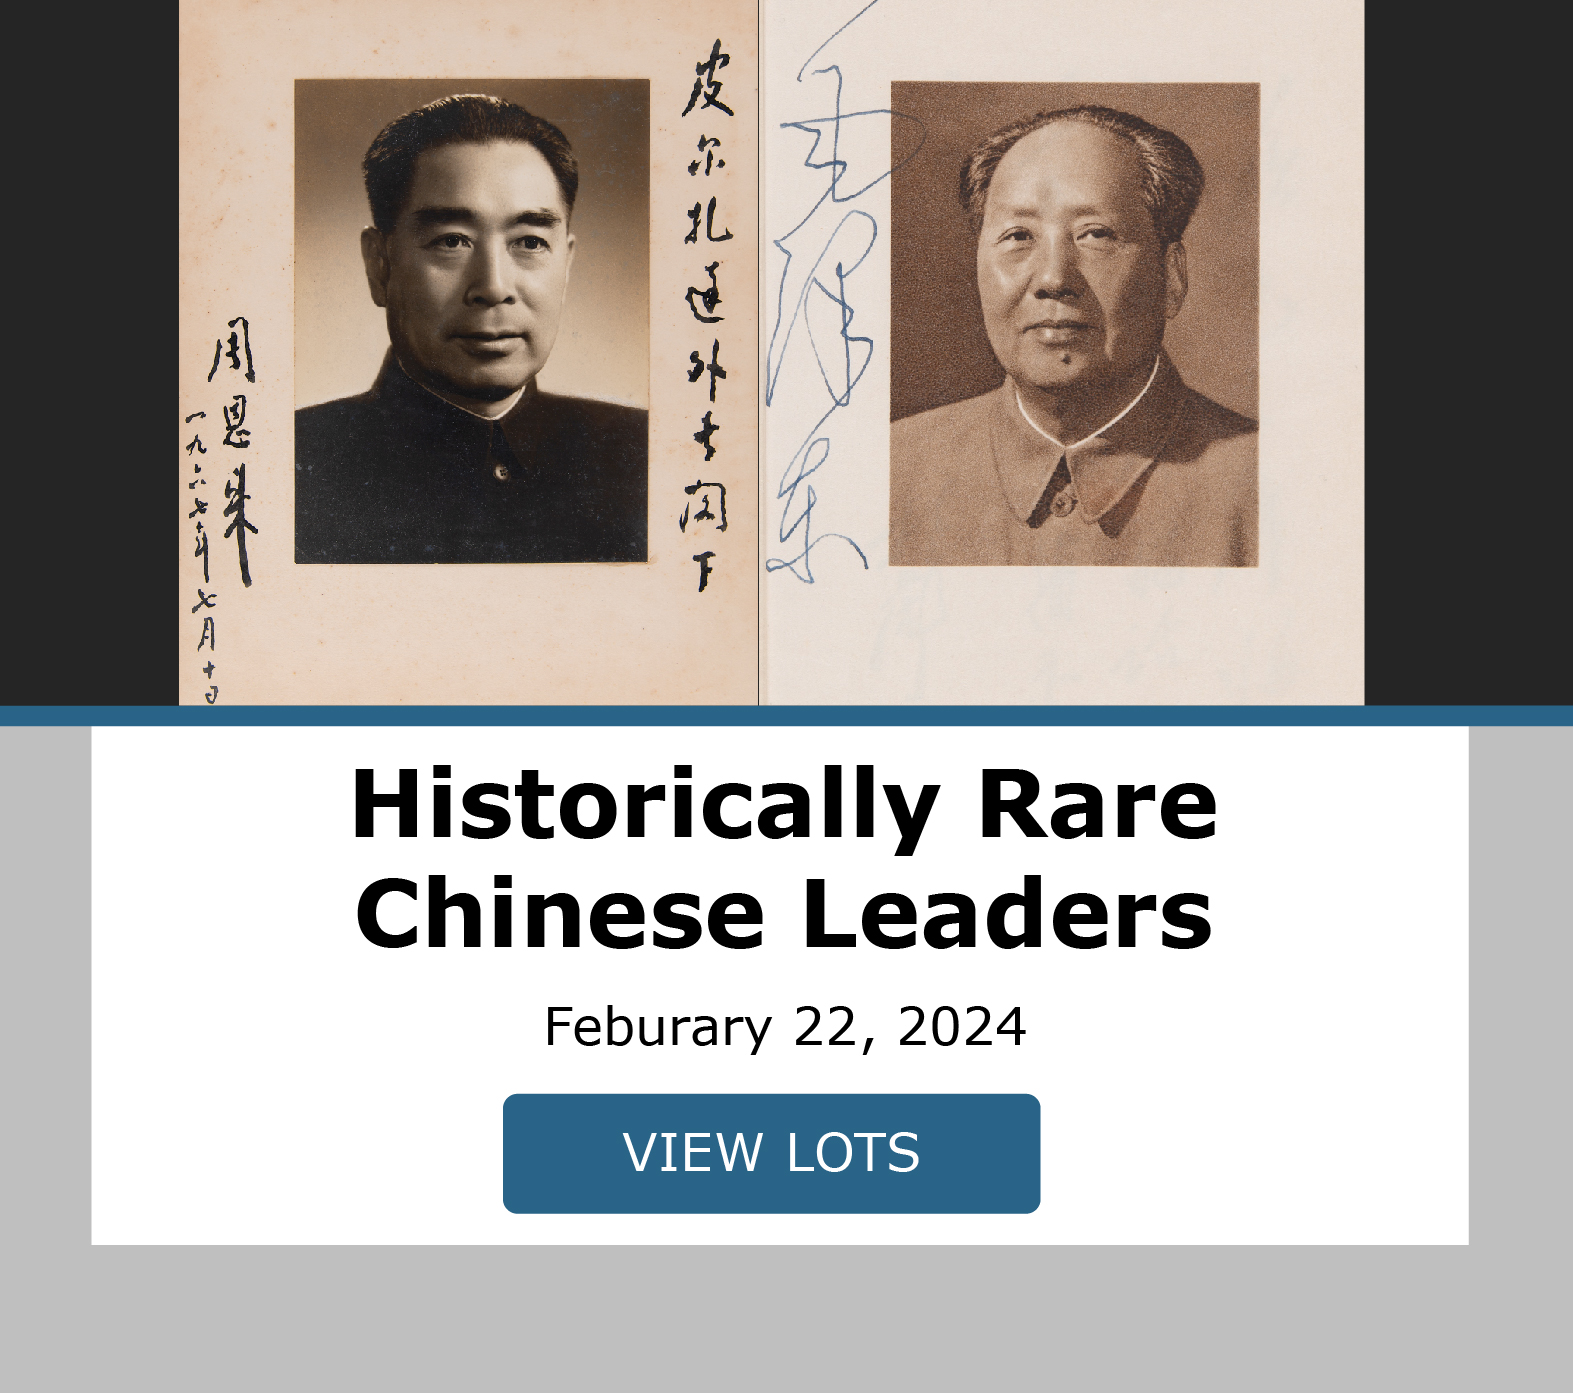 Historically Rare Chinese Leaders. Bidding closes February 22. View Lots!